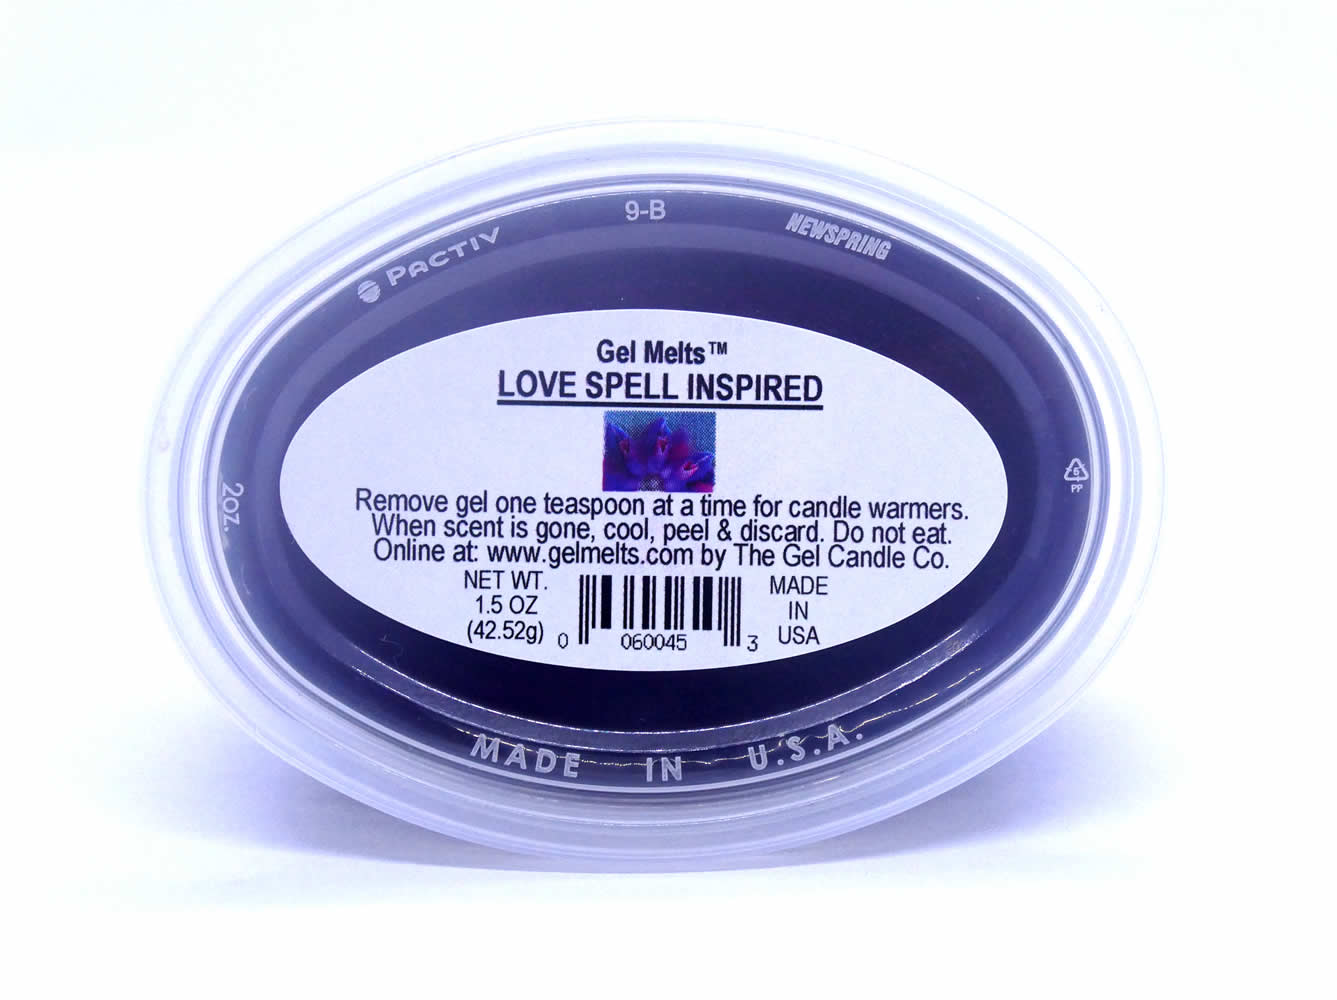 Love Spell Inspired scented Gel Melts™ for warmers - 3 pack